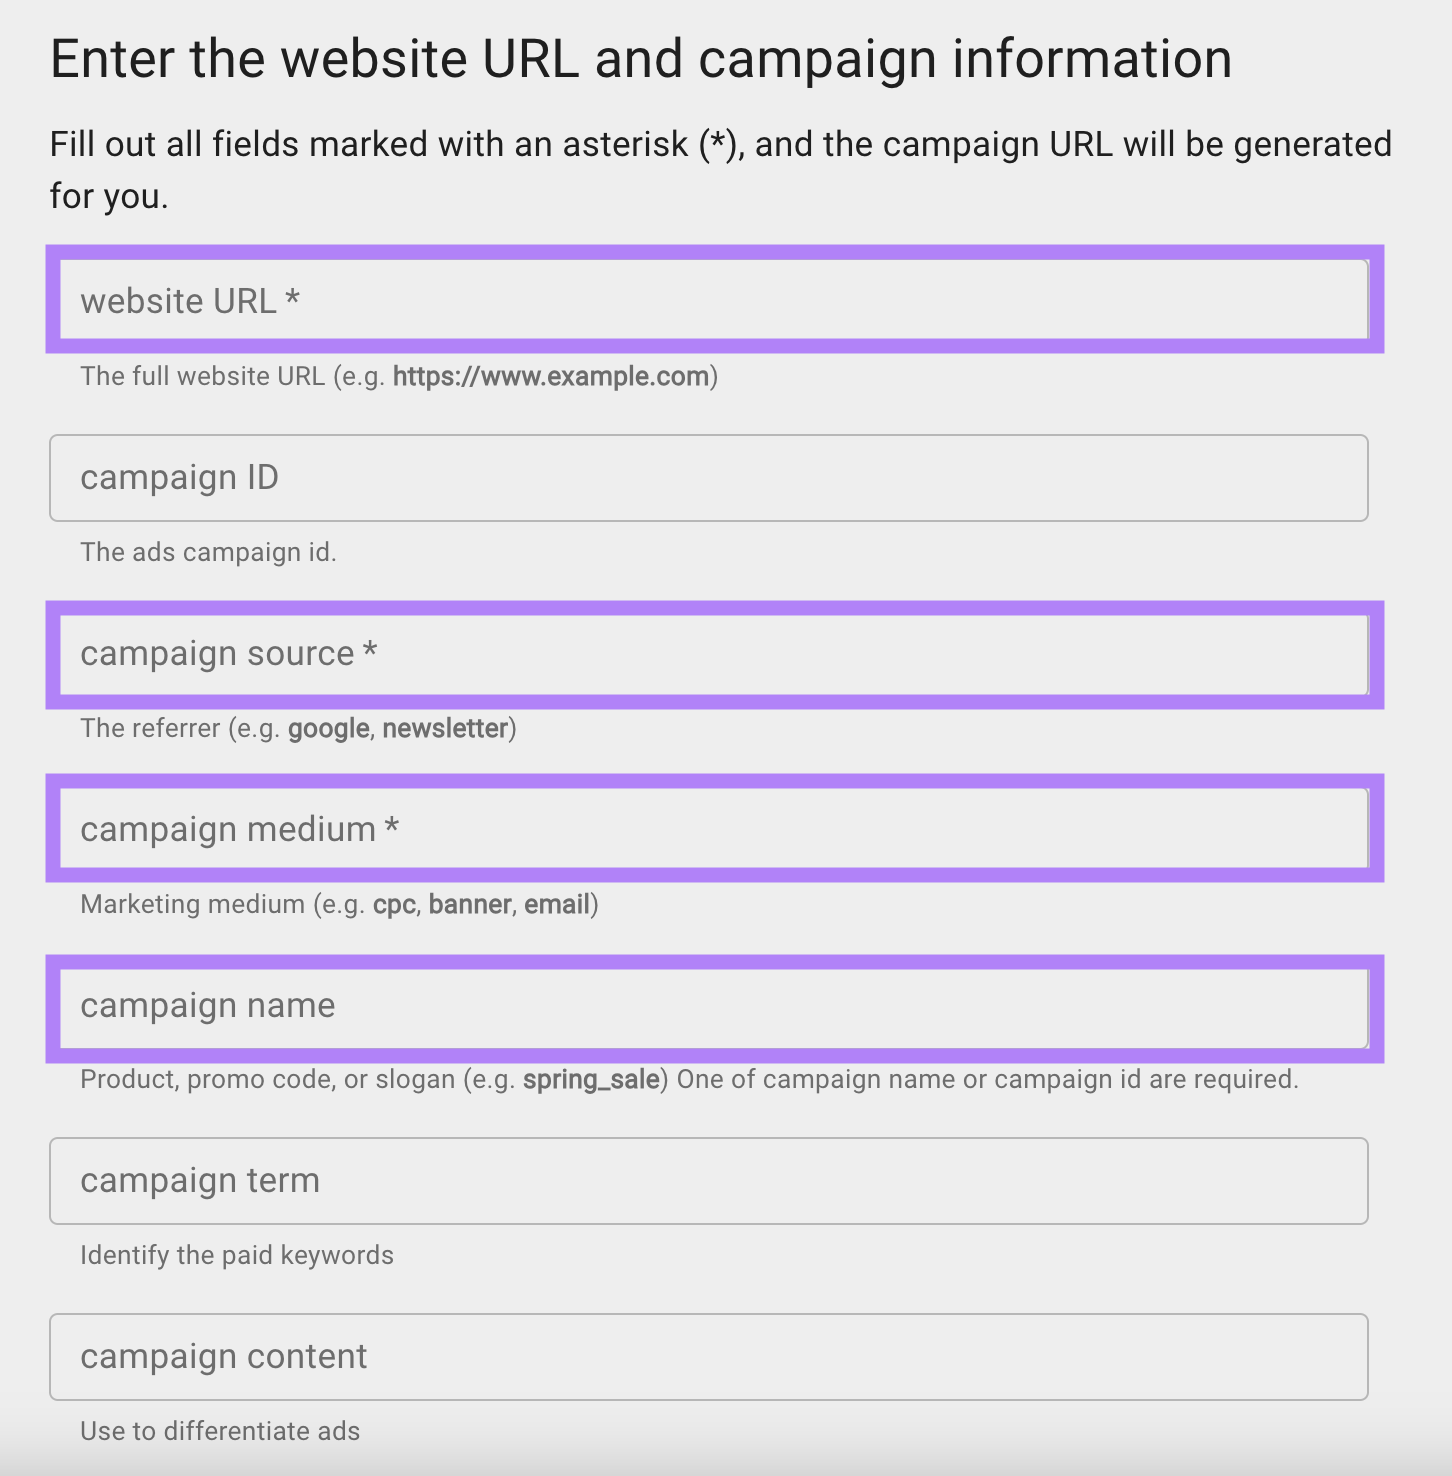 "Enter the website URL and campaign information" page